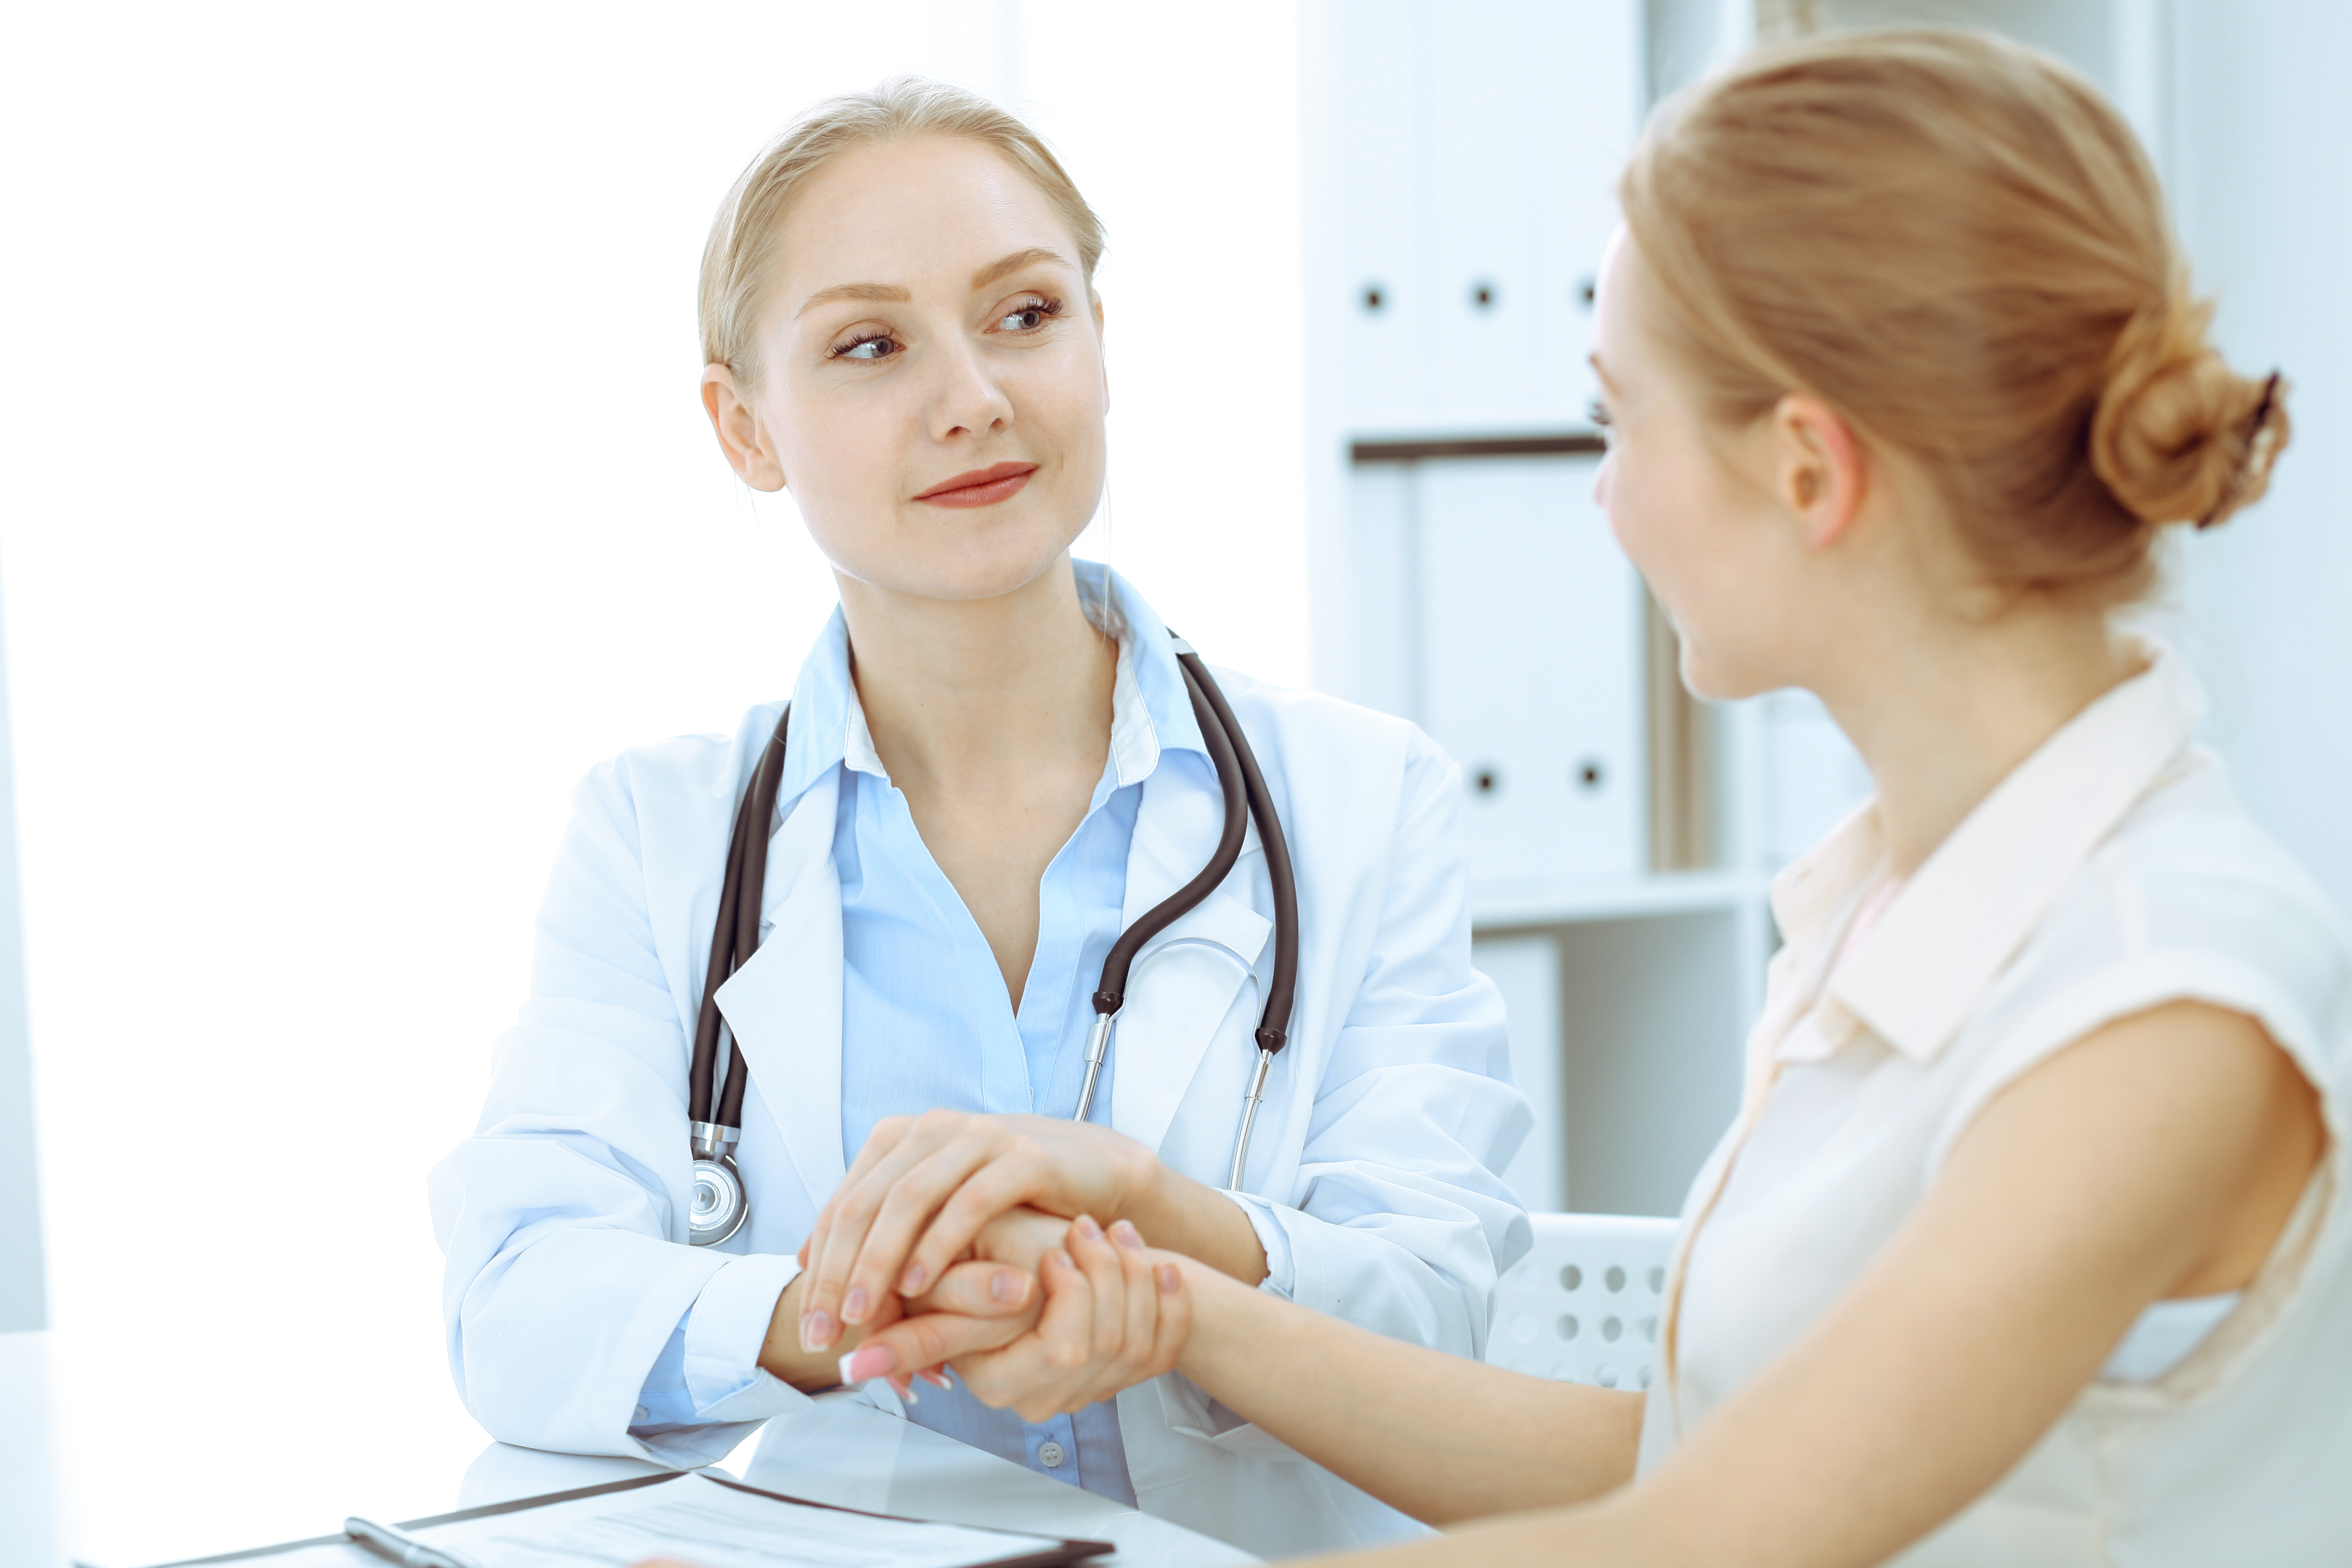 Consulting healthcare professionals can be very beneficial.